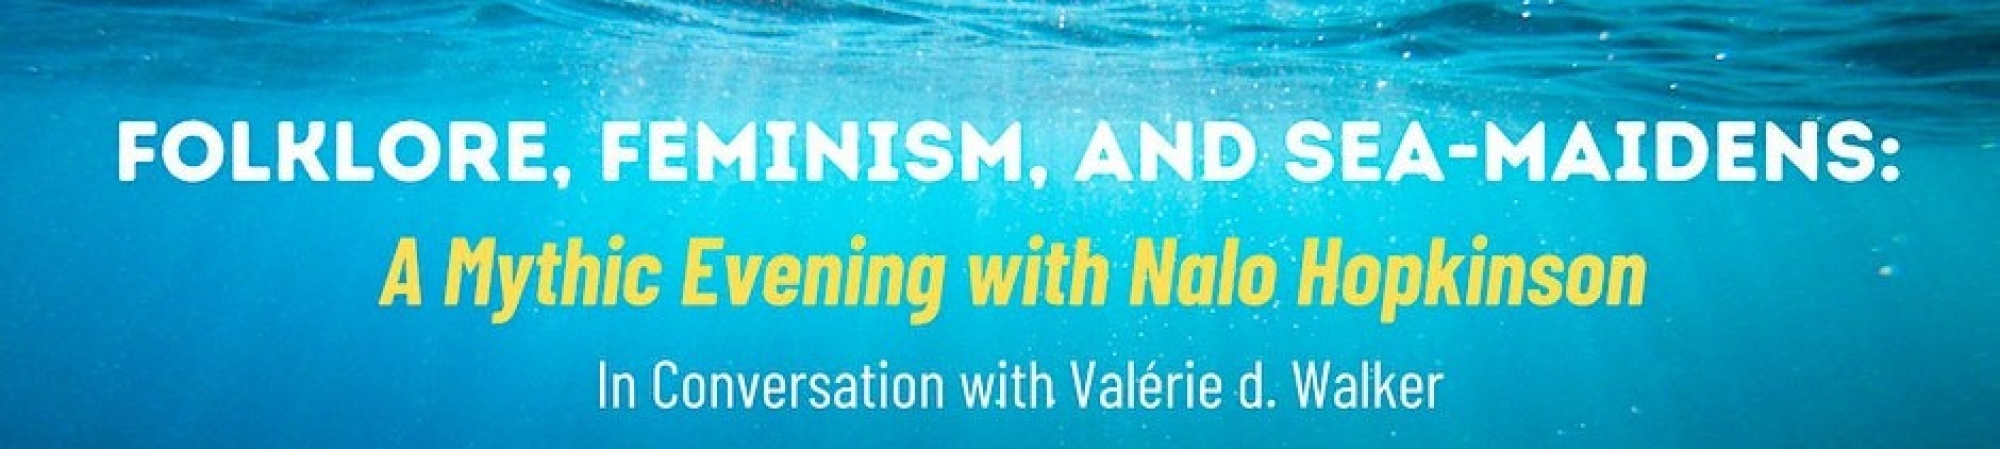 Folklore, Feminism and Sea-Maidens: A Mythic Evening with Nalo Hopkinson in Conversation with Valérie d. Walker